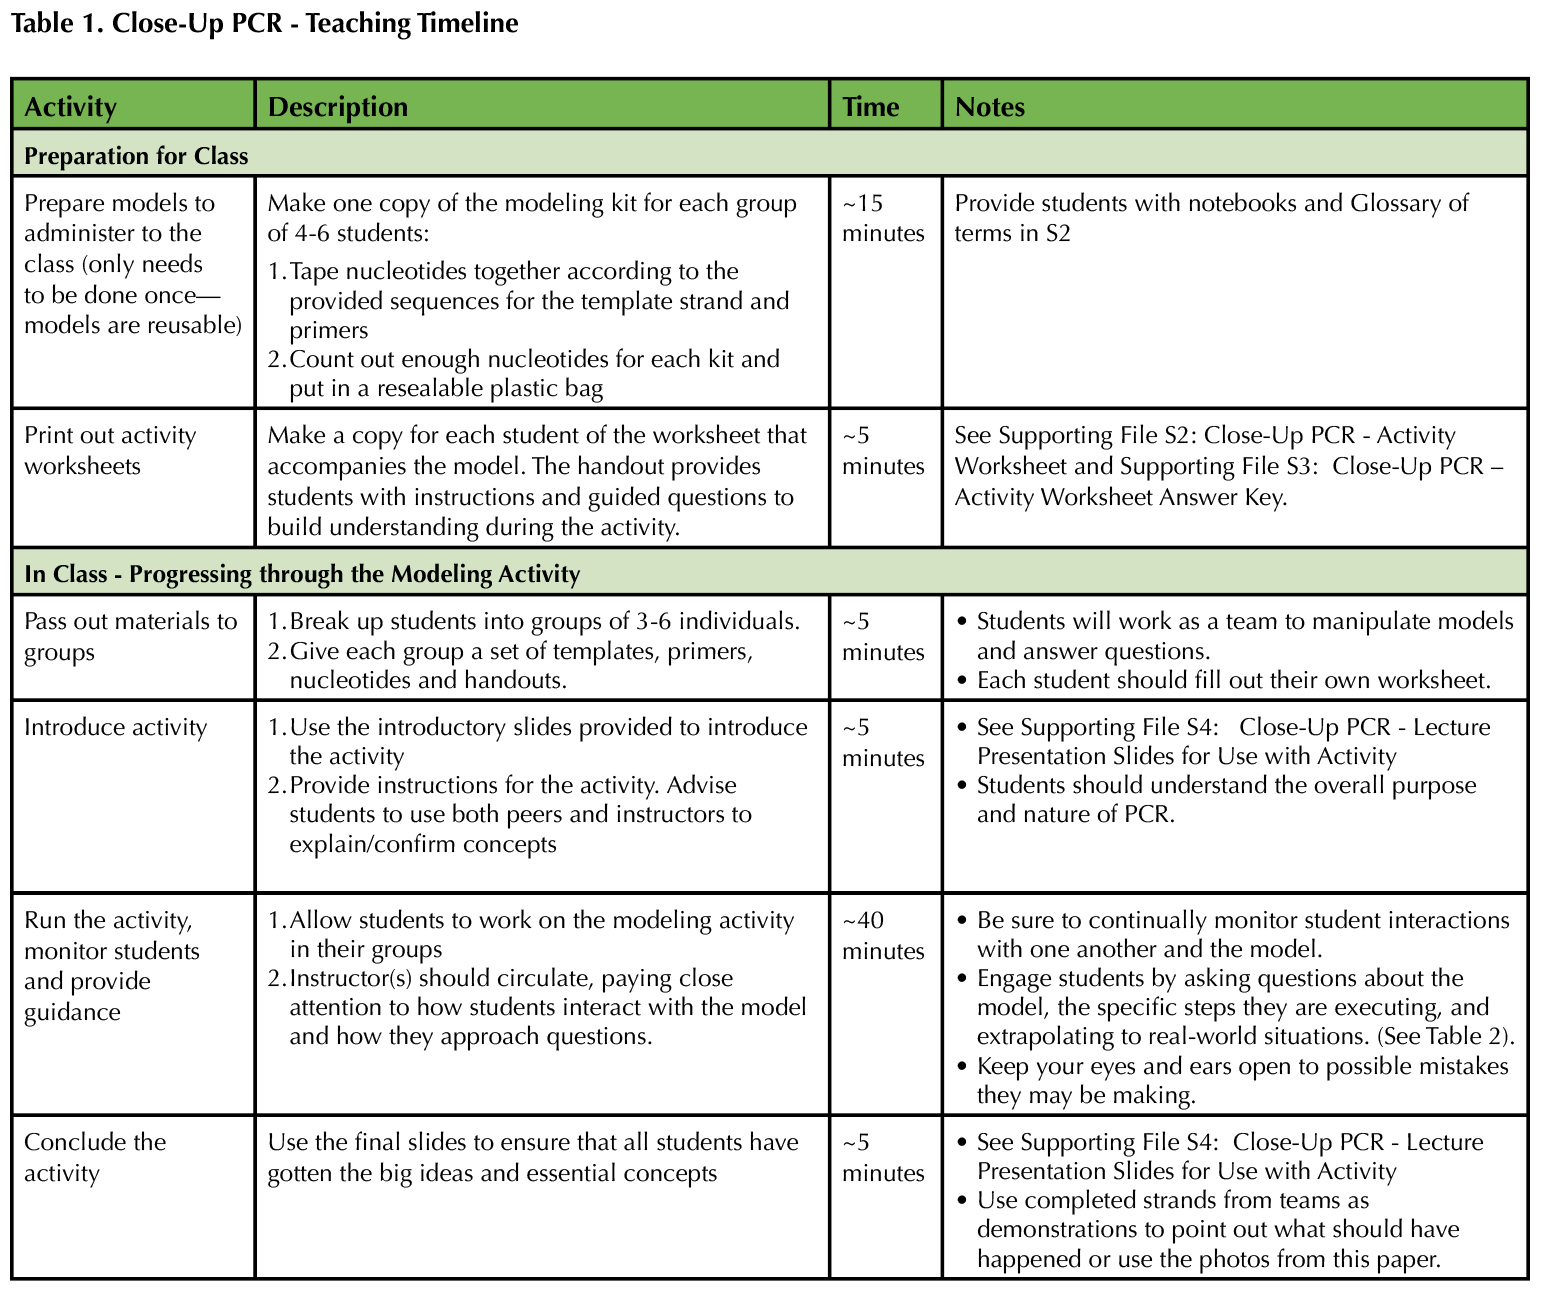 Table 1. Close Up PCR - teaching Timeline